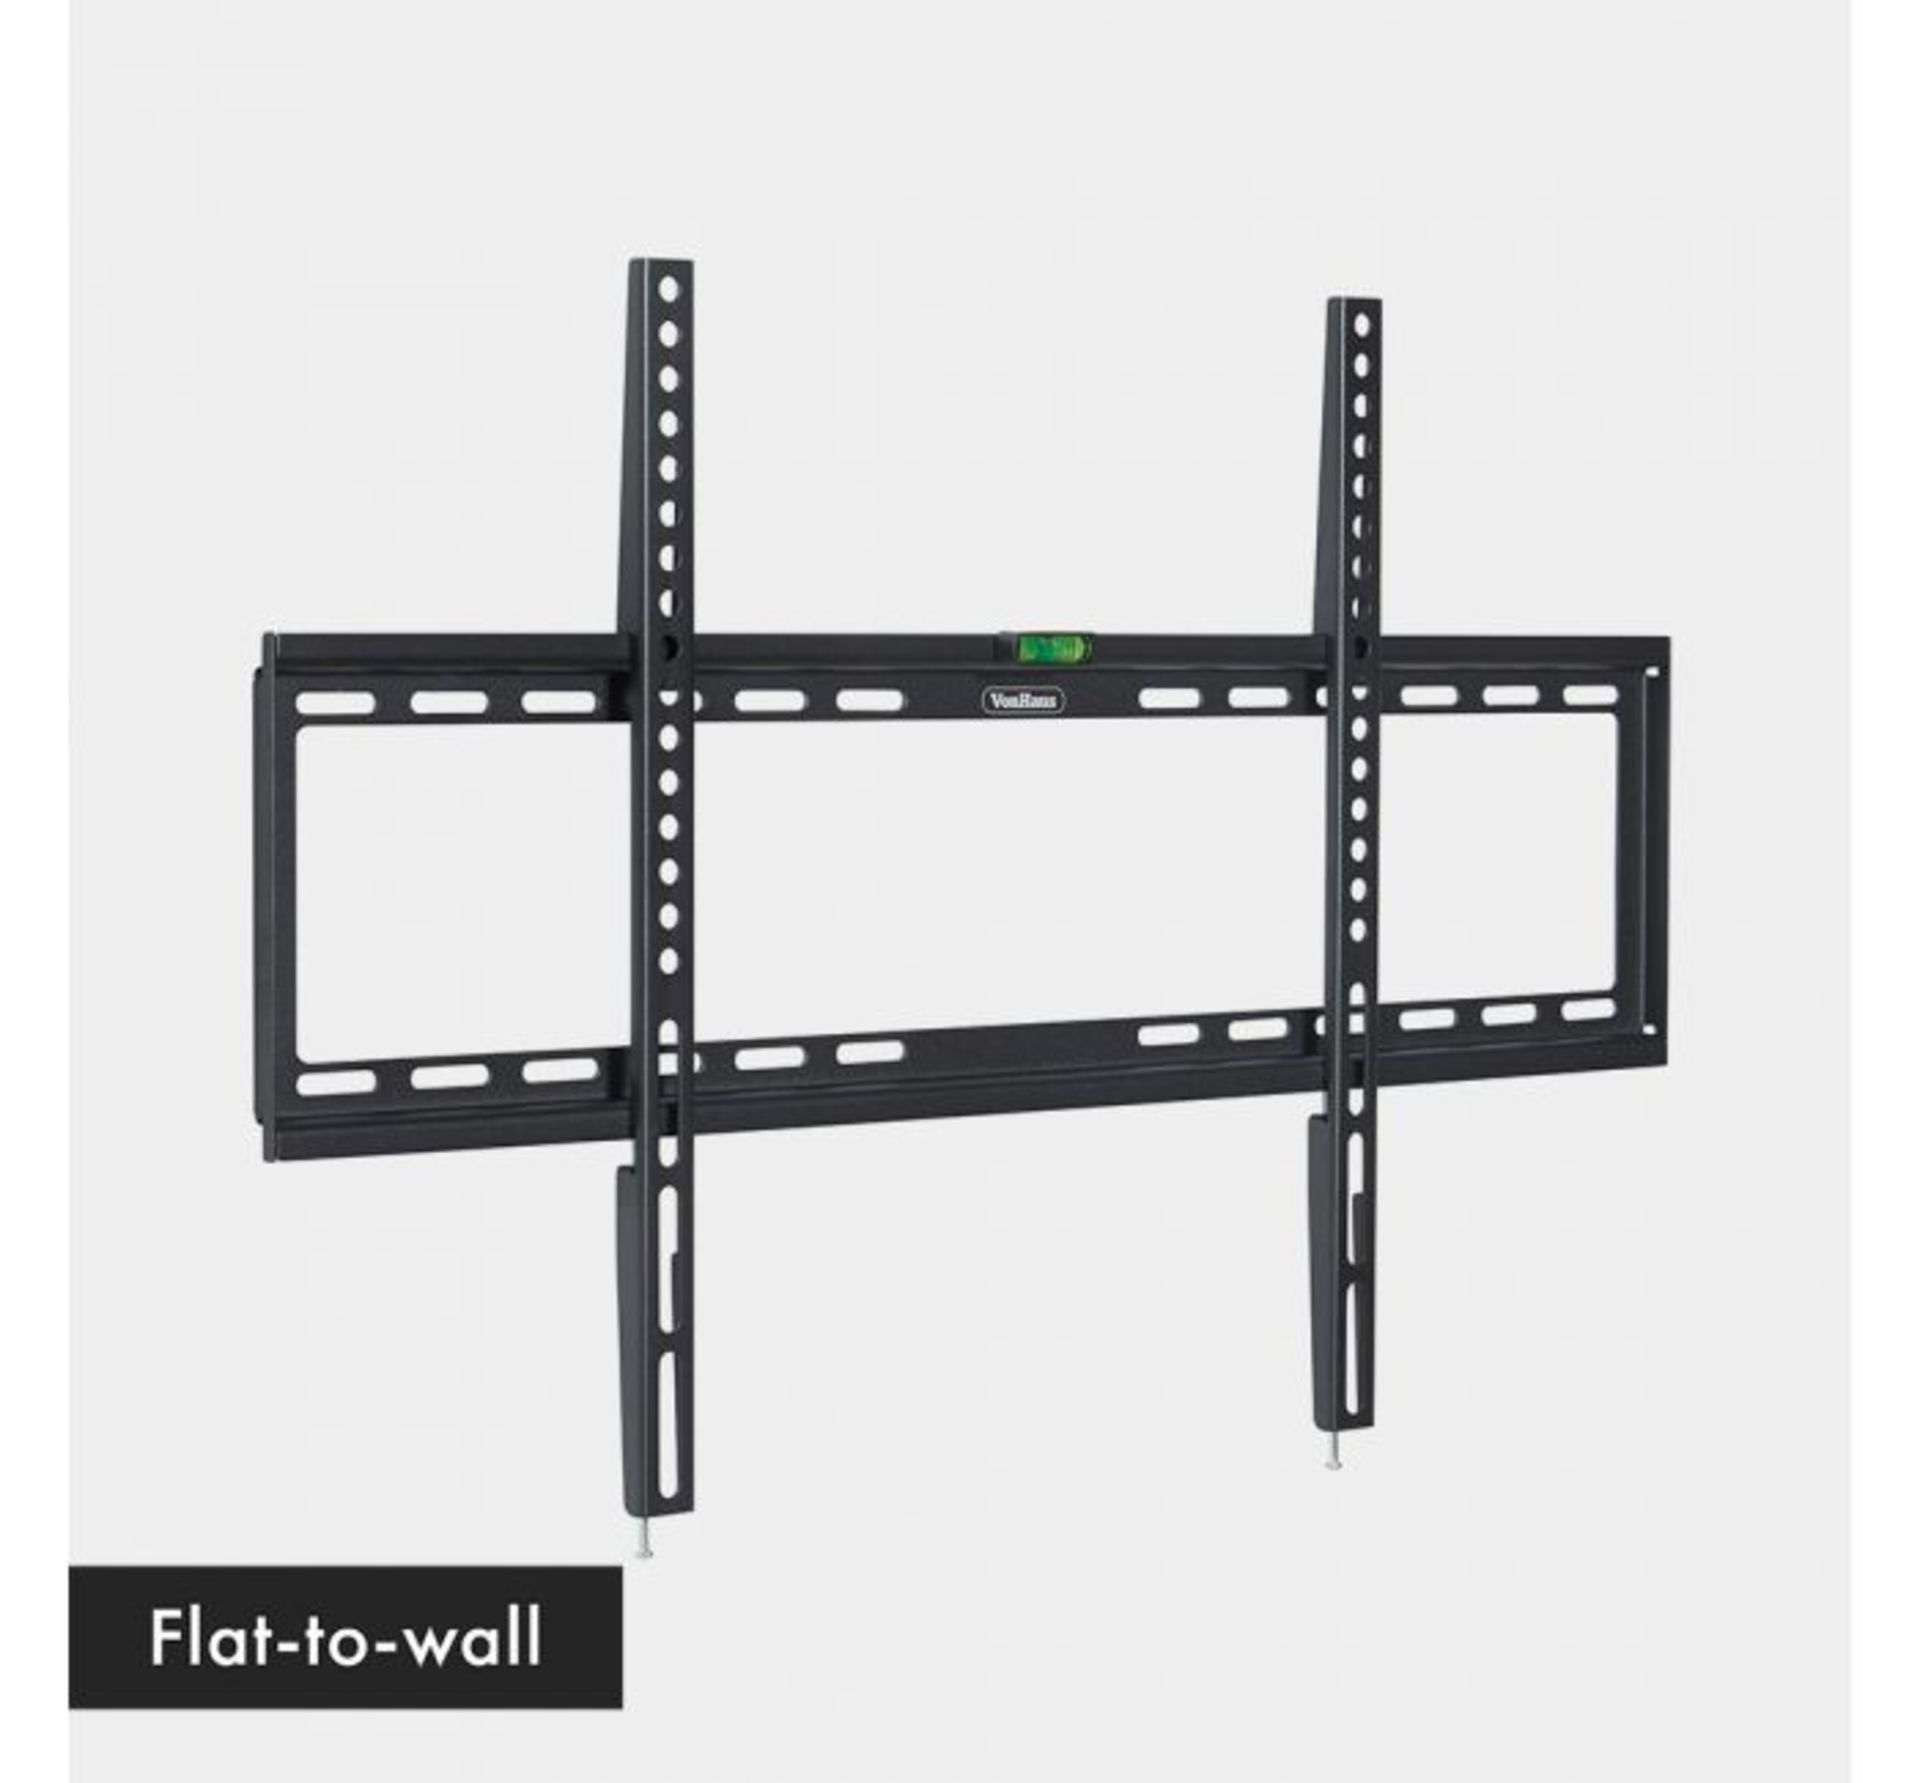 (OM23) 37-70 inch Flat-to-wall TV bracket Please confirm your TV’s VESA Mounting Dimensions ... - Image 2 of 2